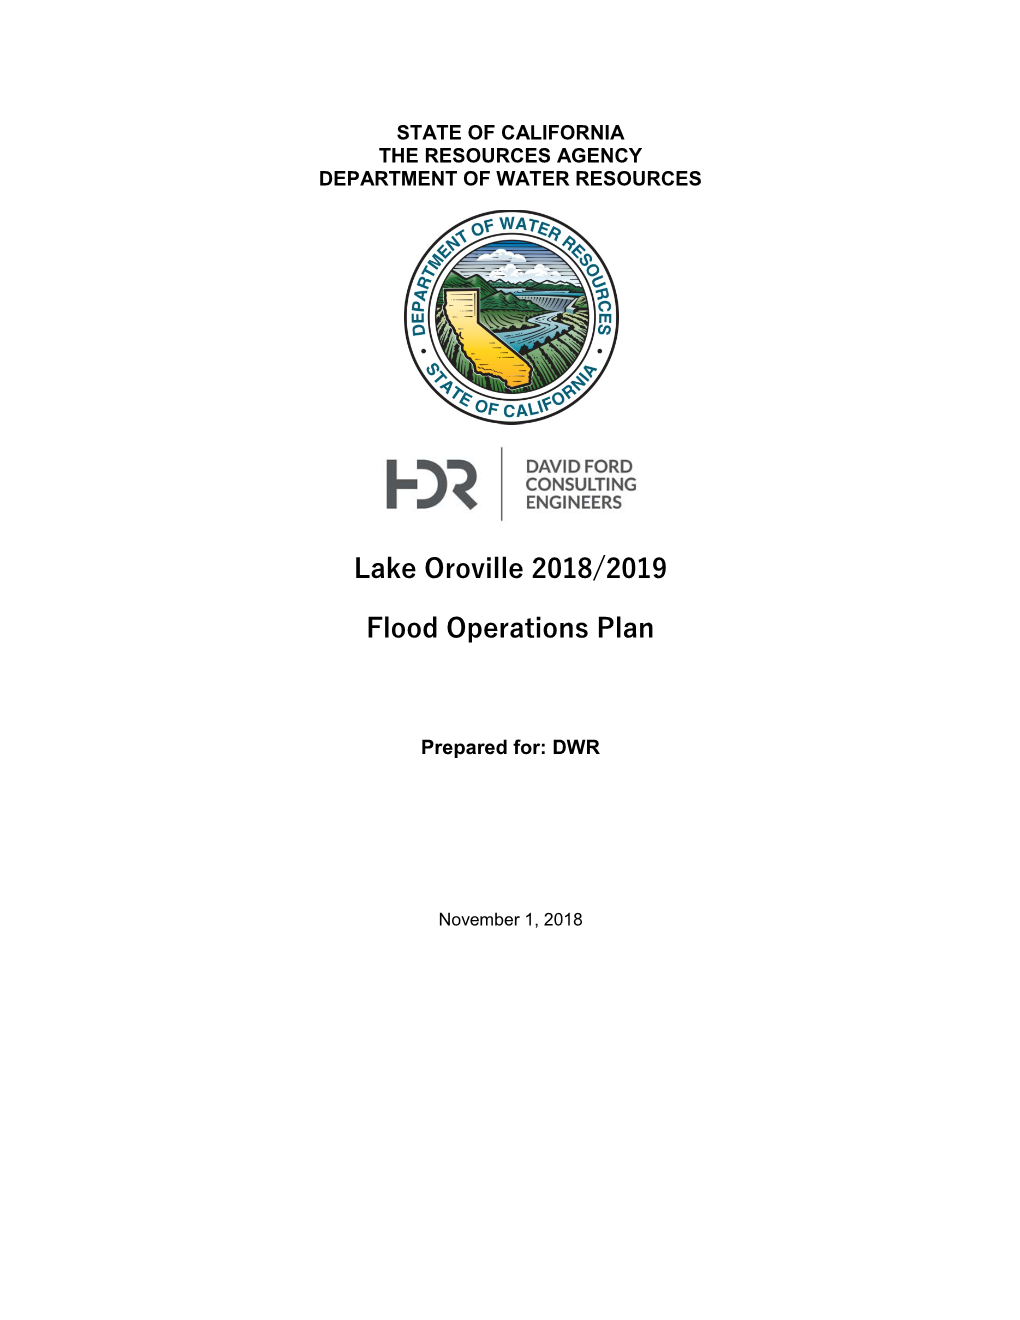 Lake Oroville 2018/2019 Flood Operations Plan